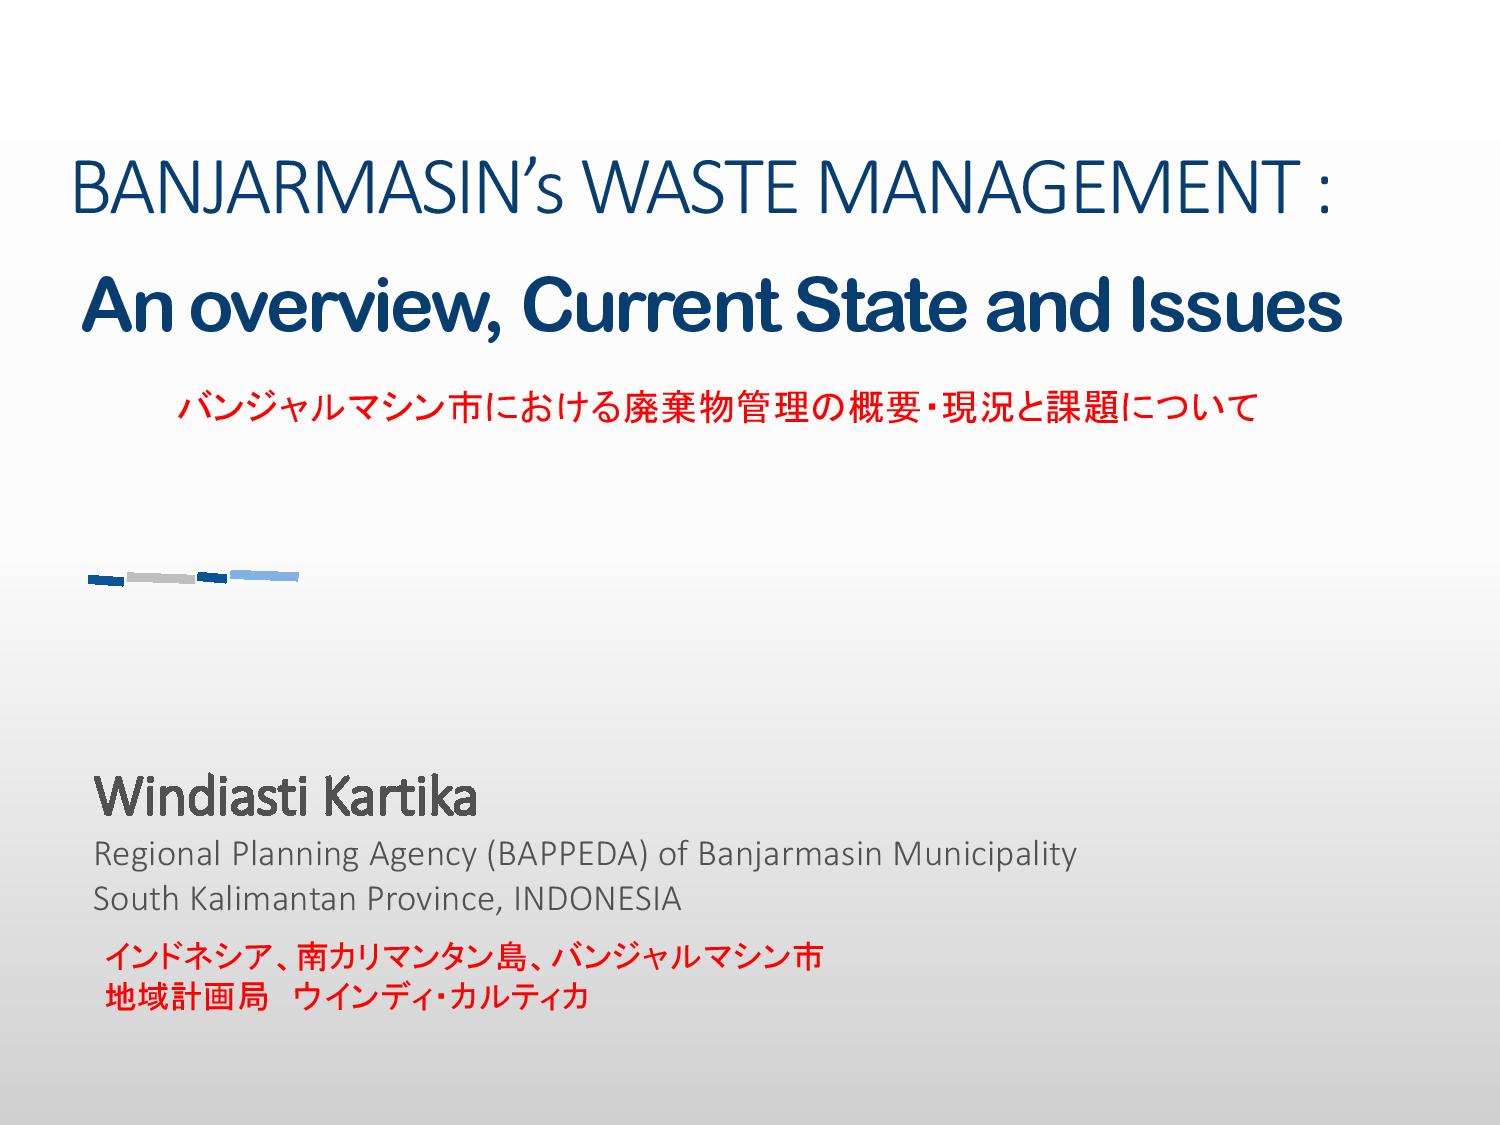 Banjarmasin’s Waste Management – An overview, current state and issues: Expert Group Meetings 2018